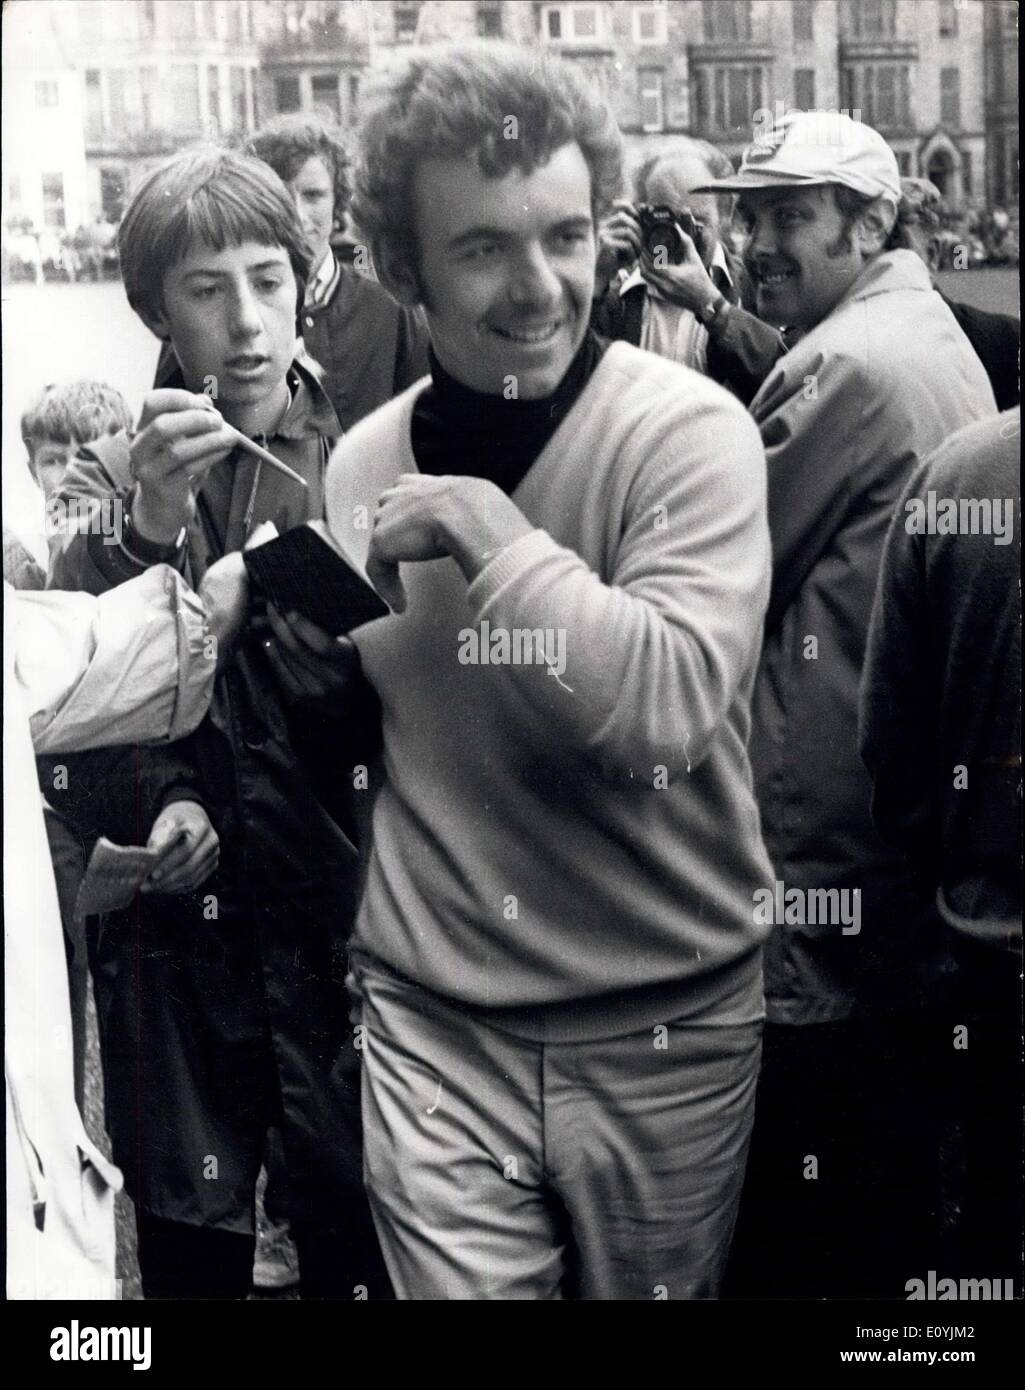 Jul. 10, 1970 - Open Golf Championship At St. Andrews. Photo shows Tony Jacklin, the defending champion, is besieged by autograph hunters - during the Open Gold Championship at St. Andrews. Stock Photo